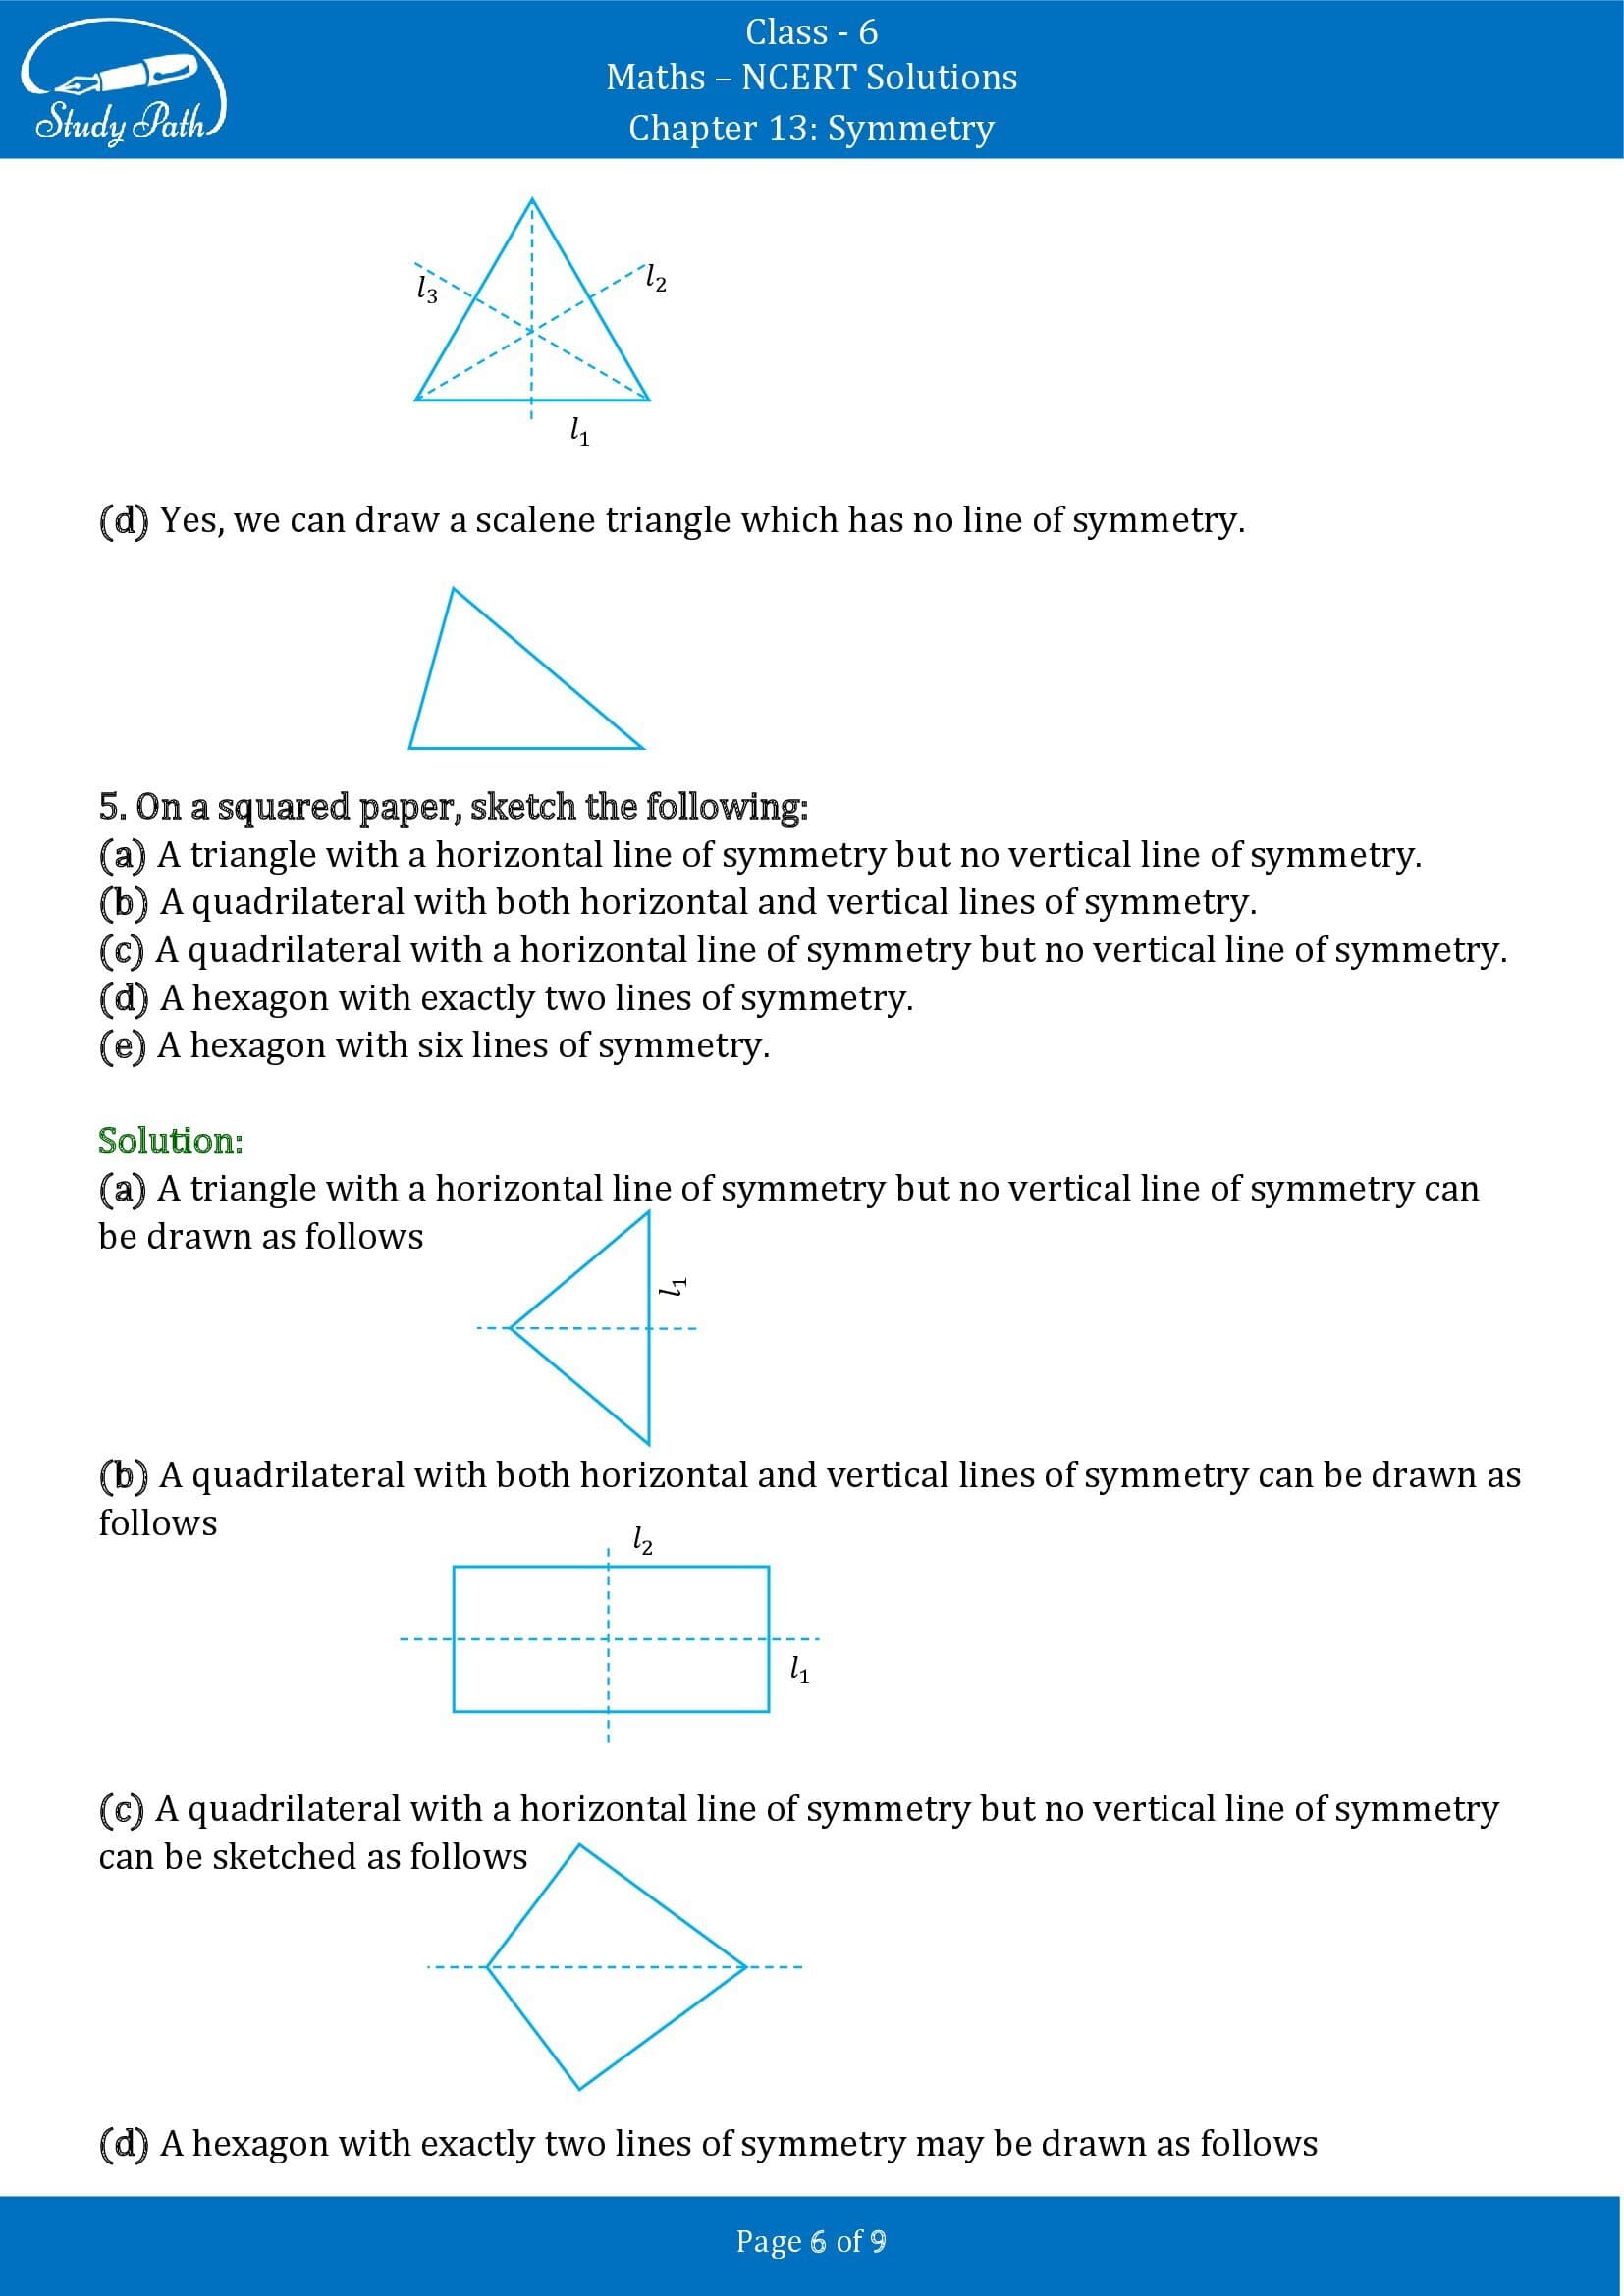 NCERT Solutions for Class 6 Maths Chapter 13 Symmetry Exercise 13.2 00006